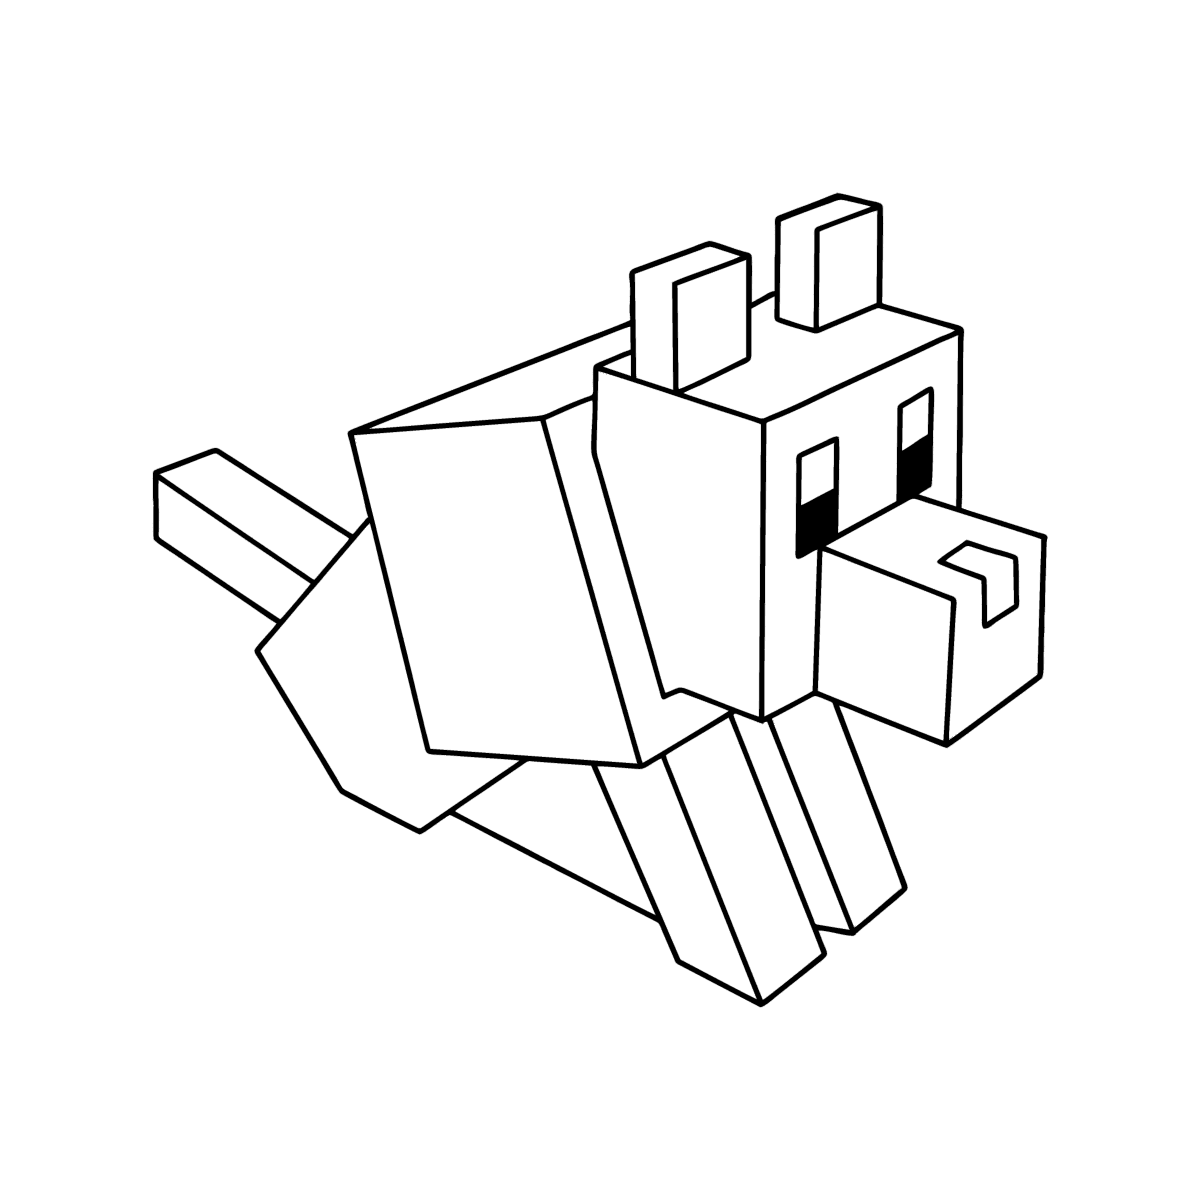 minecraft dog coloring pages